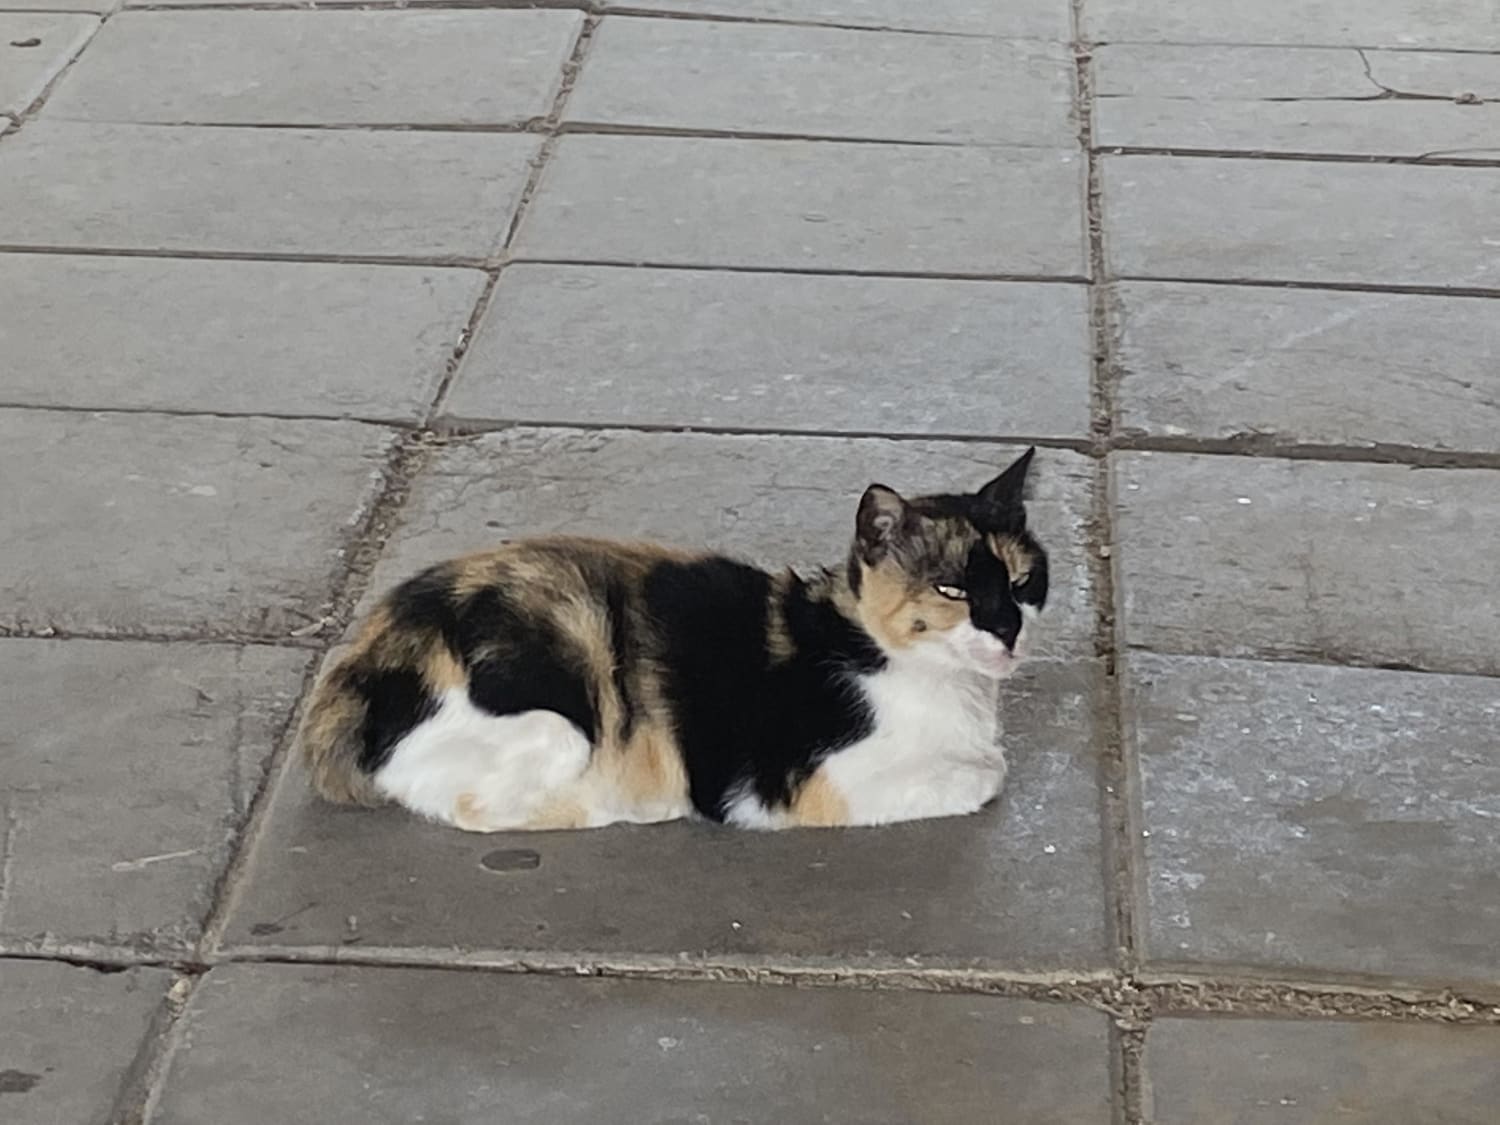 in my country there is lot of stray cats so it’s not uncommon for a wild loaf to appear